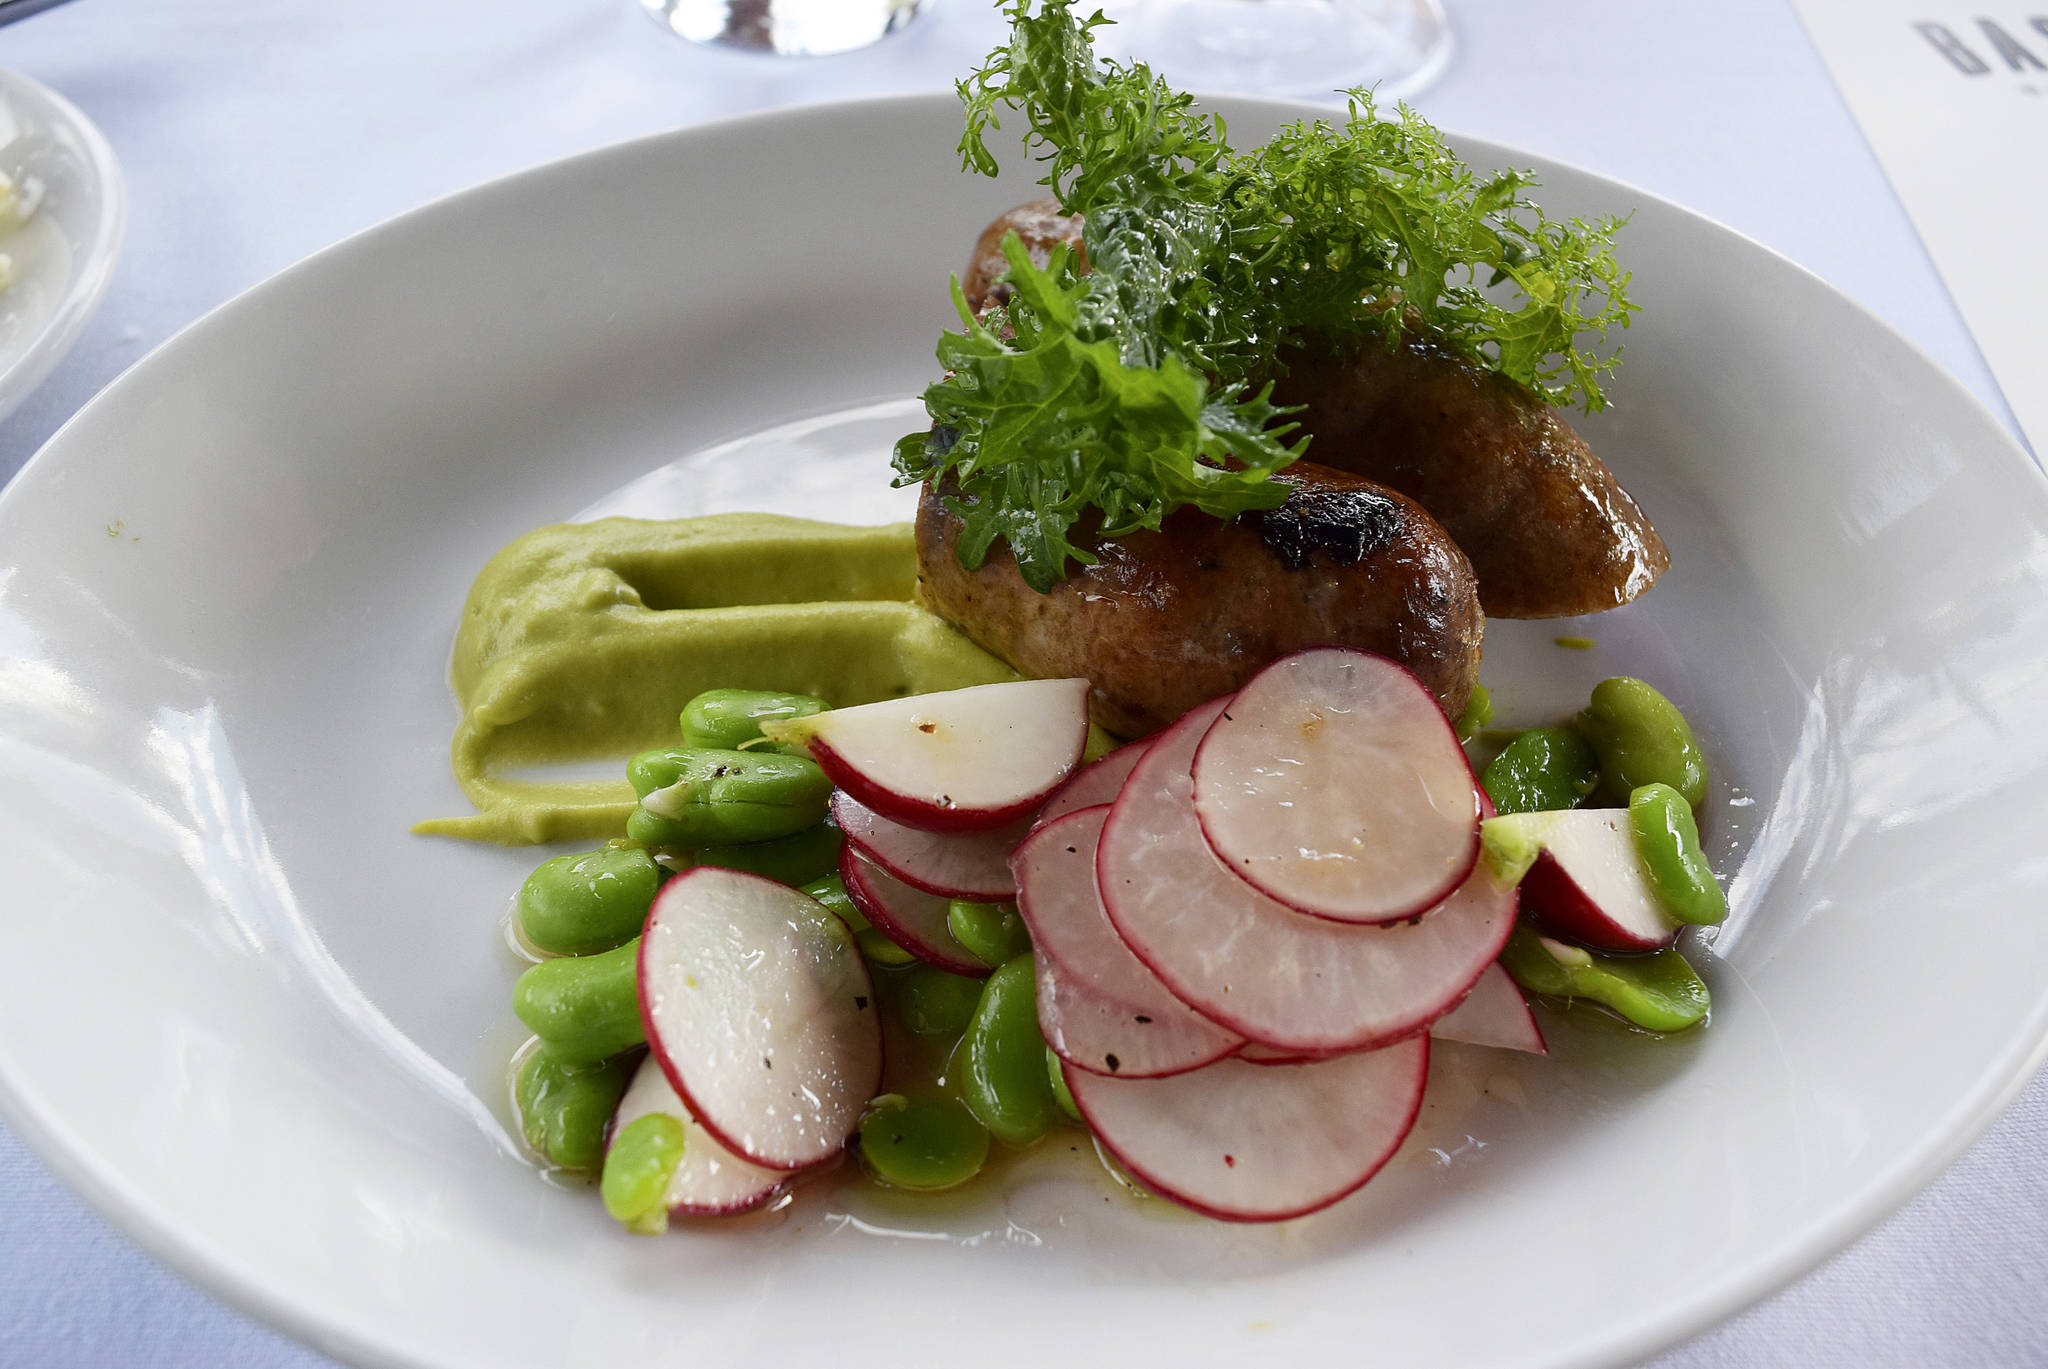 Grilled lamb sausage with fava bean, frilly greens, and 
marinated radishes from a Bastille Rooftop Garden Dinner. 
Photo courtesy Bastille Café & Bar